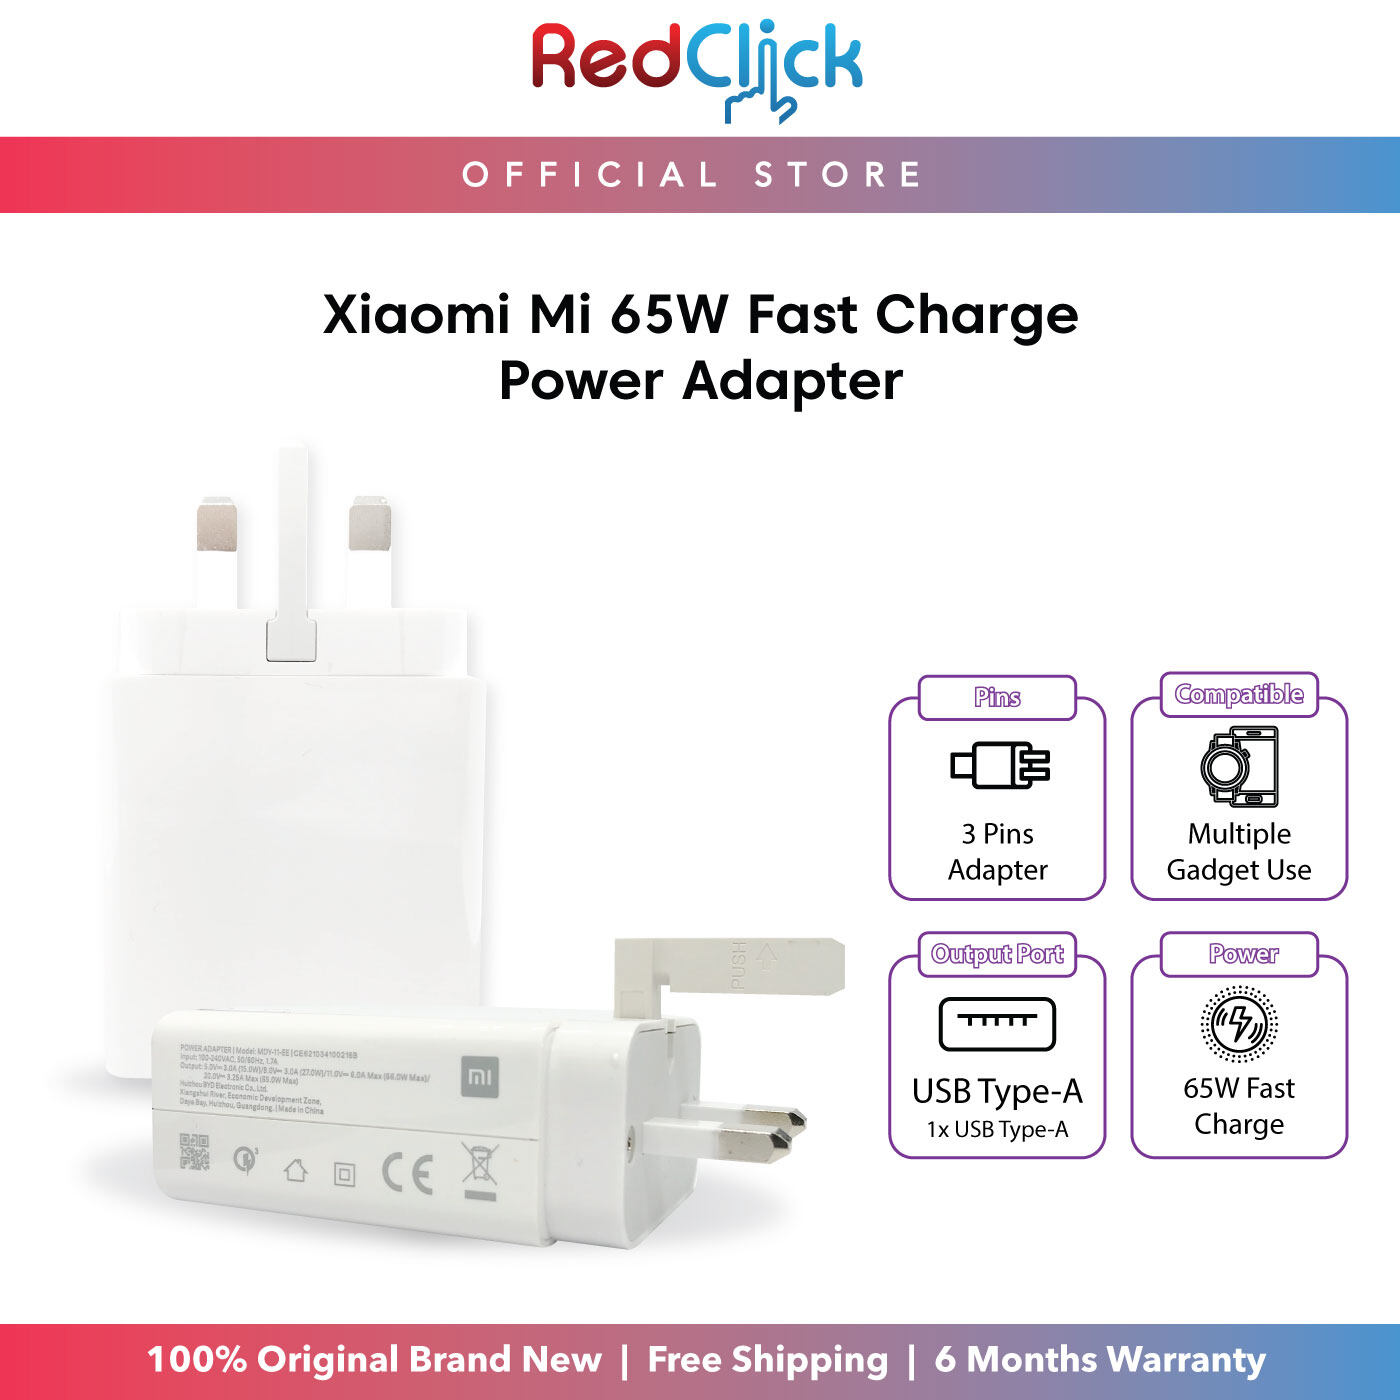 Xiaomi Mi Power Adapter 65W (Max) Support Mi Turbo Charge MDY-11-EE Original Xiaomi Product (Loose Pack)